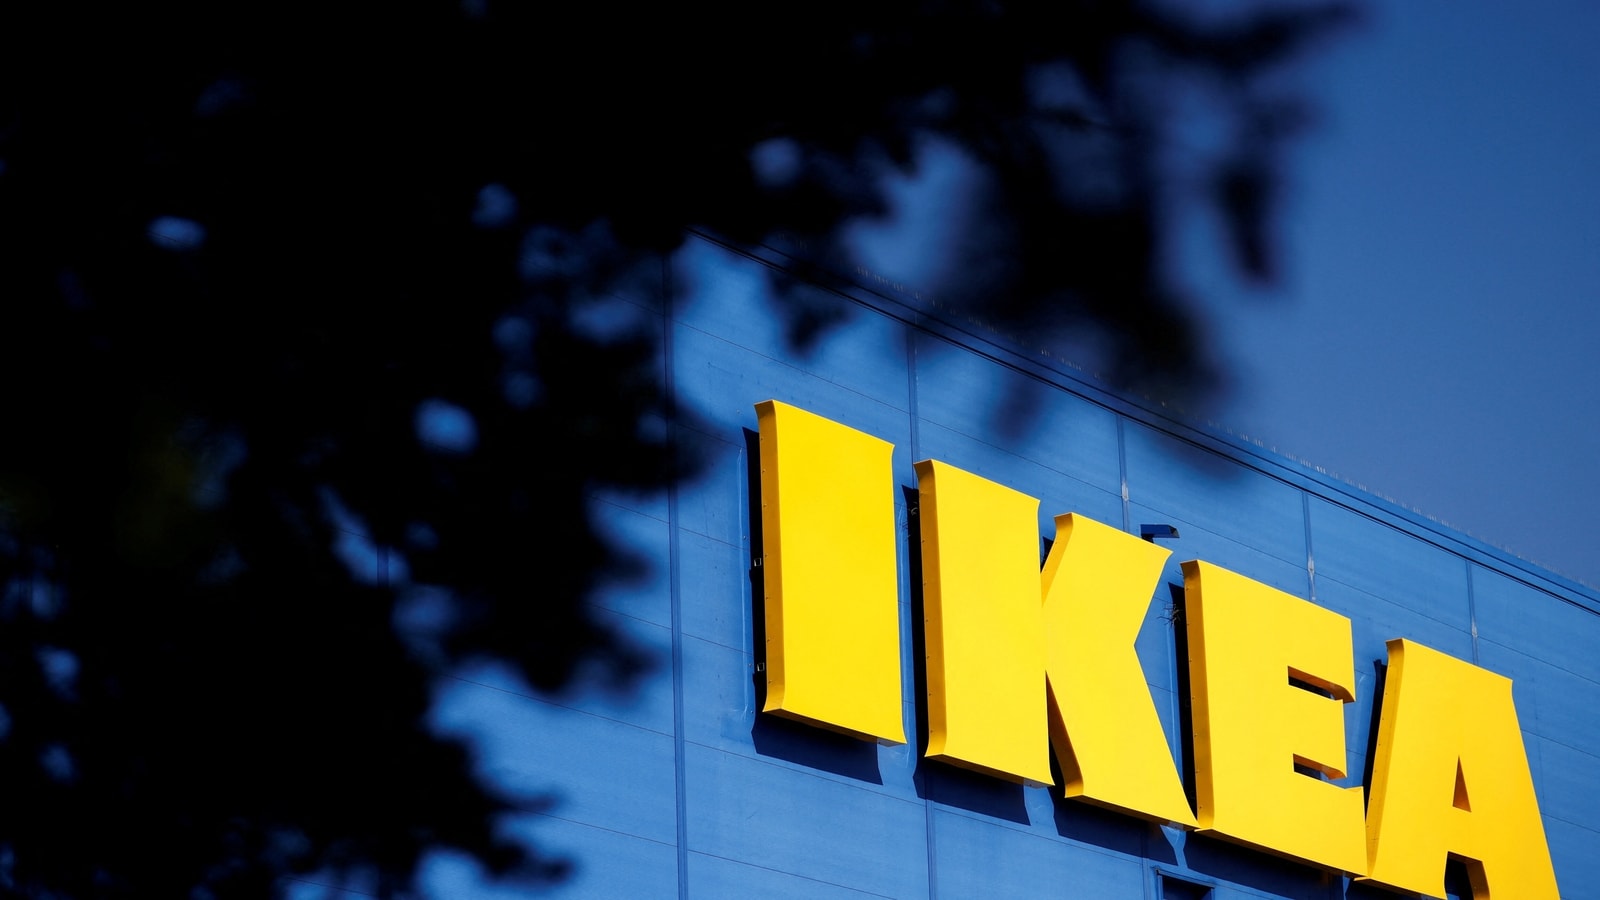 IKEA to spend 3 bln euros on stores as it adapts to e-commerce